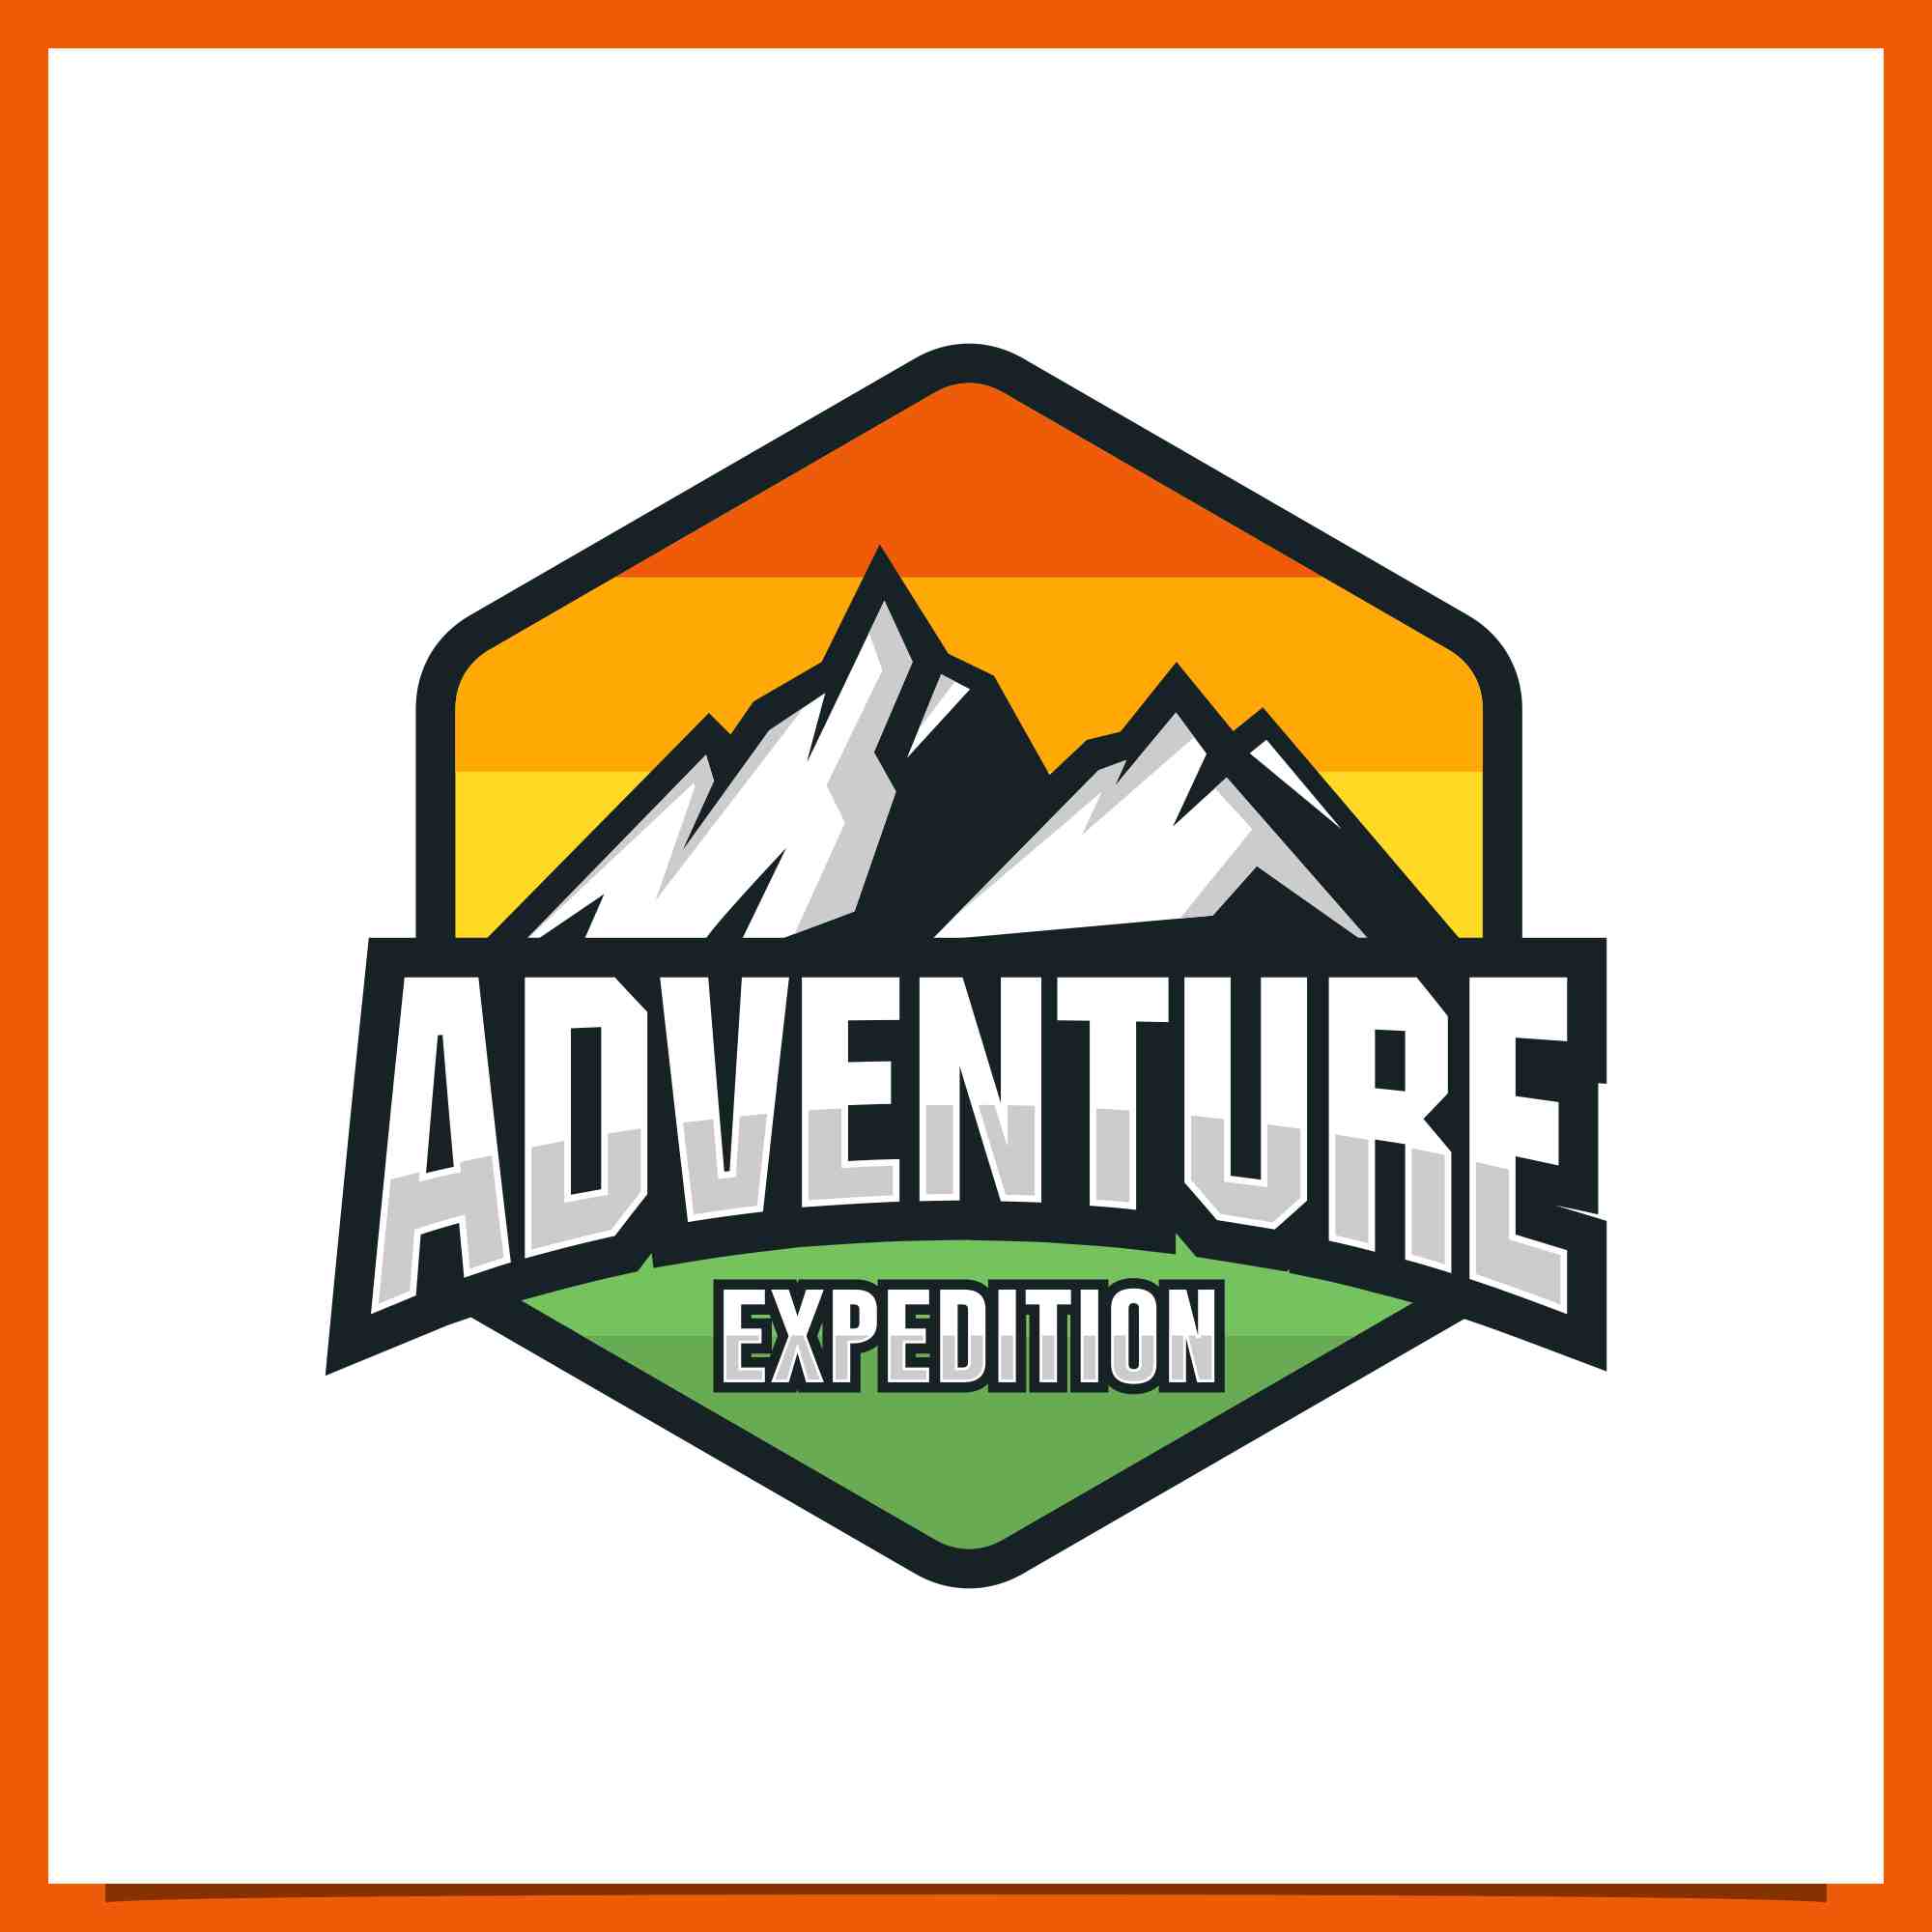 Set Adventure expedition mountains outdoor logo collection - $4 preview image.